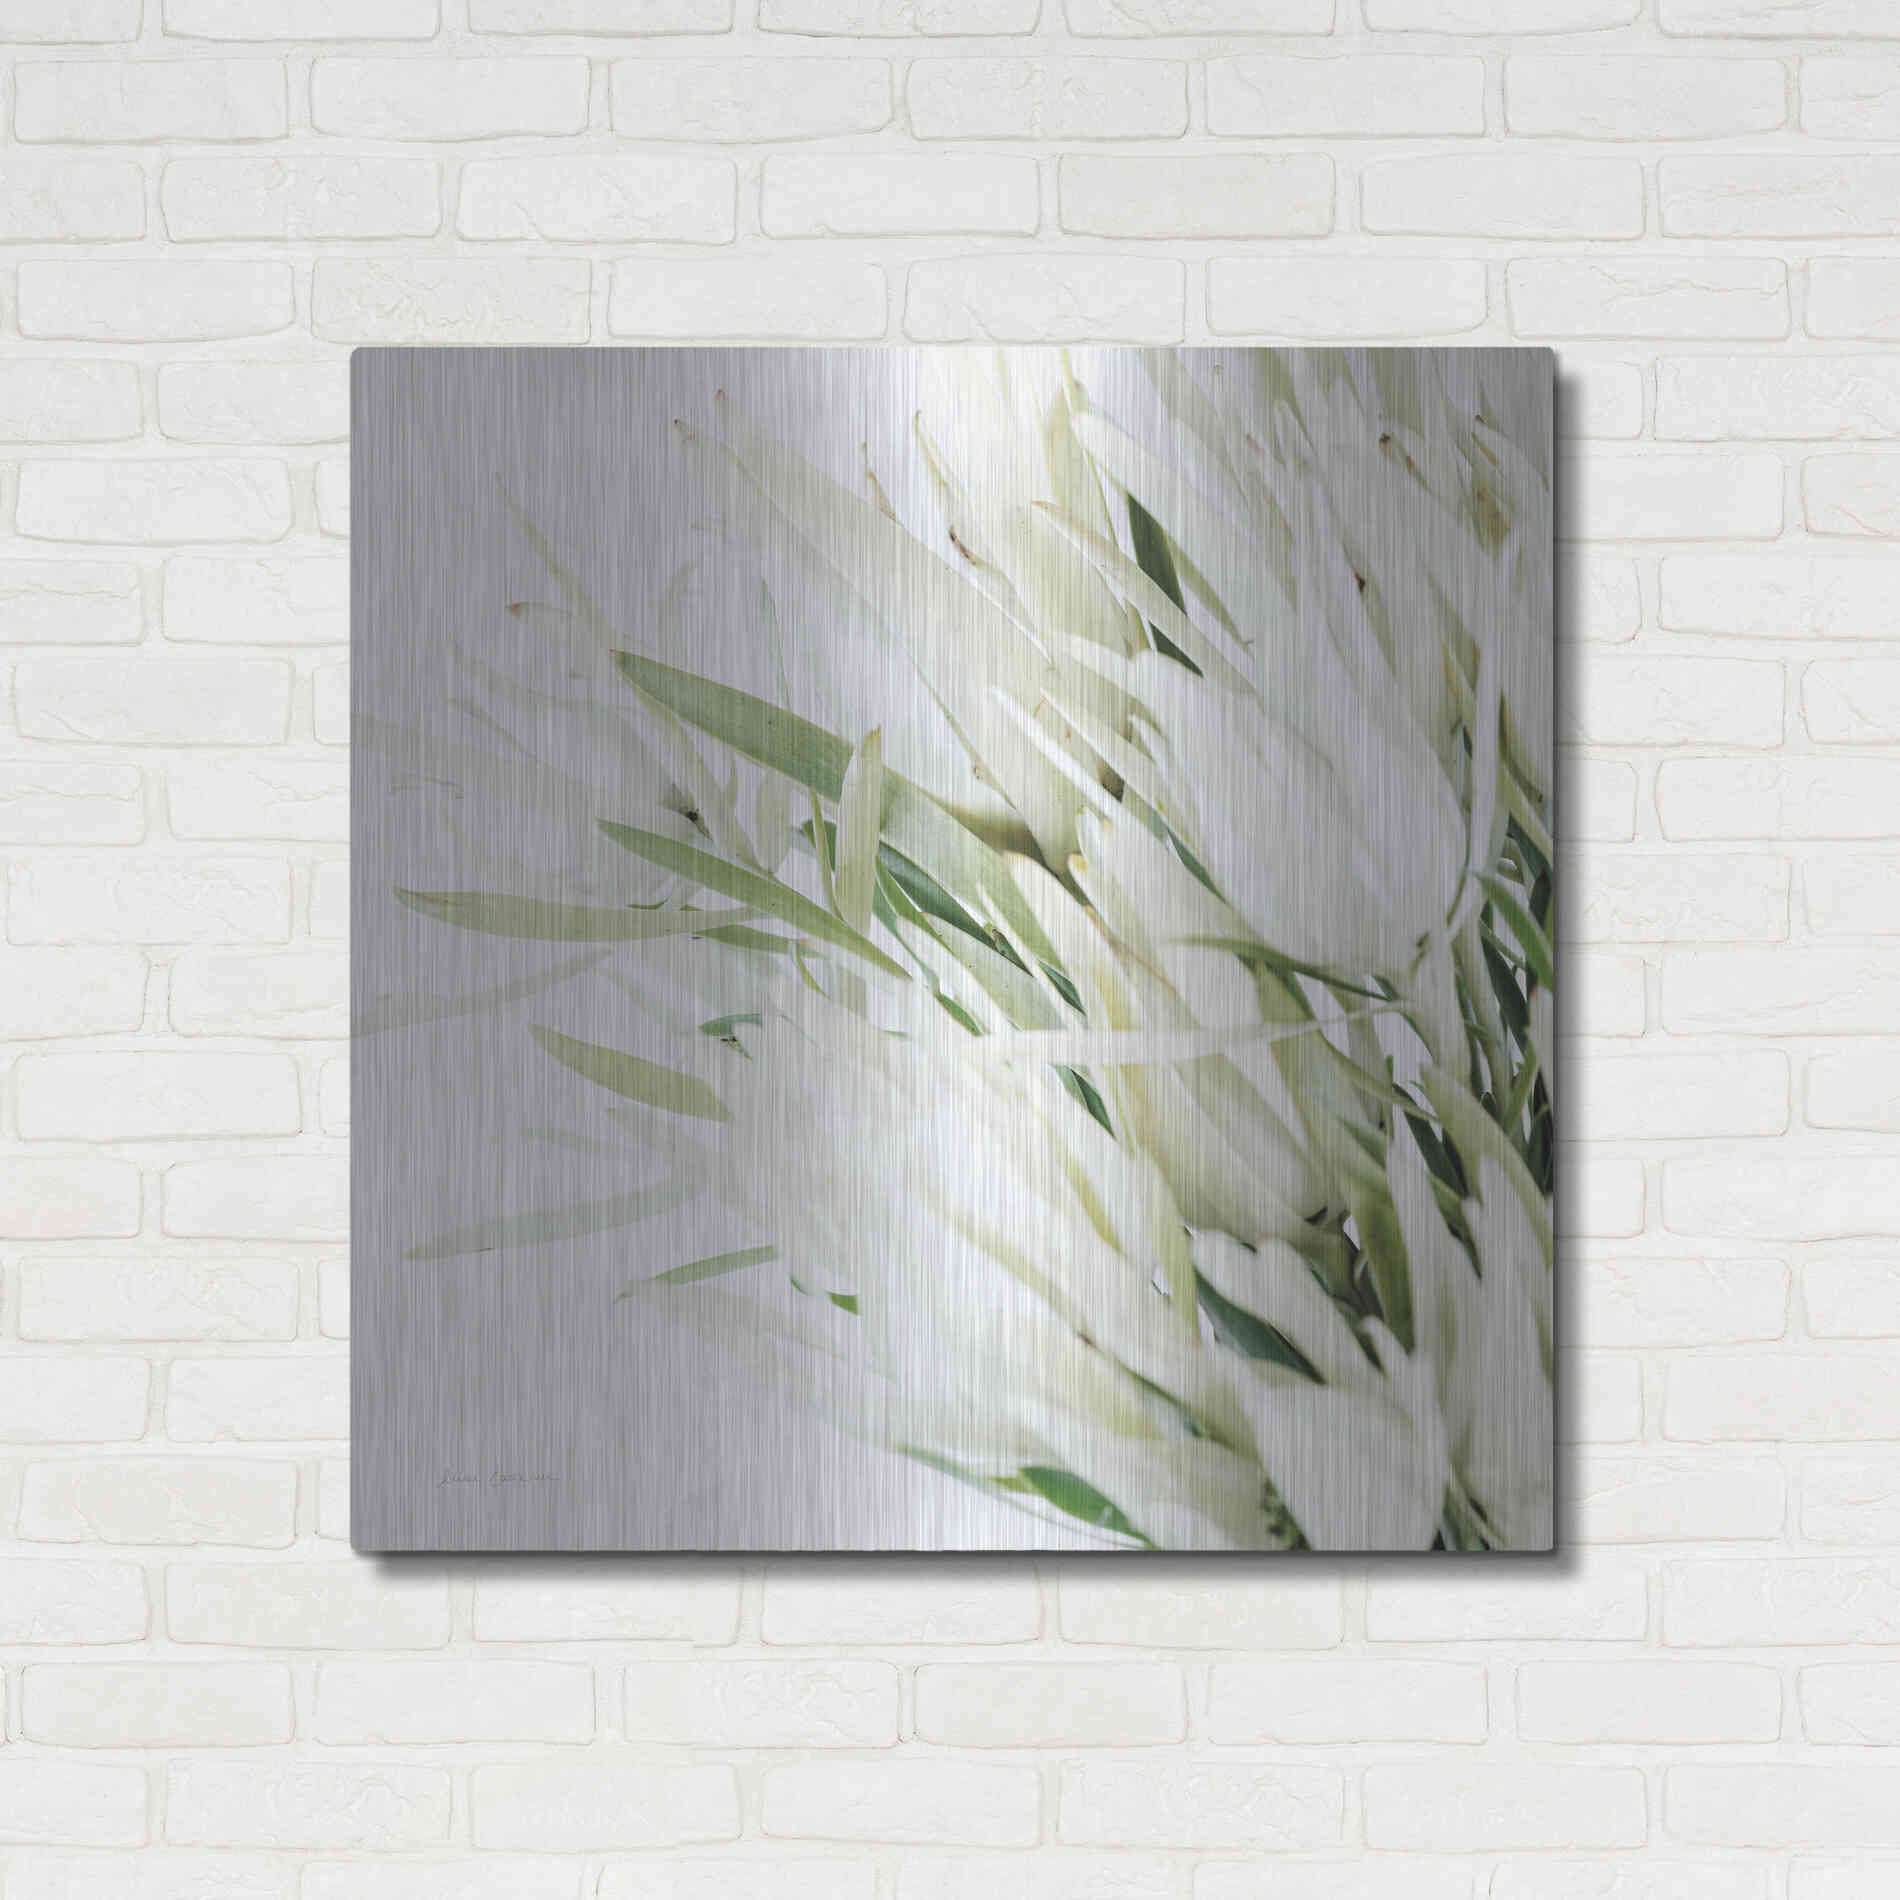 Luxe Metal Art 'Leucadendron Oasis Crop' by Elise Catterall, Metal Wall Art,36x36